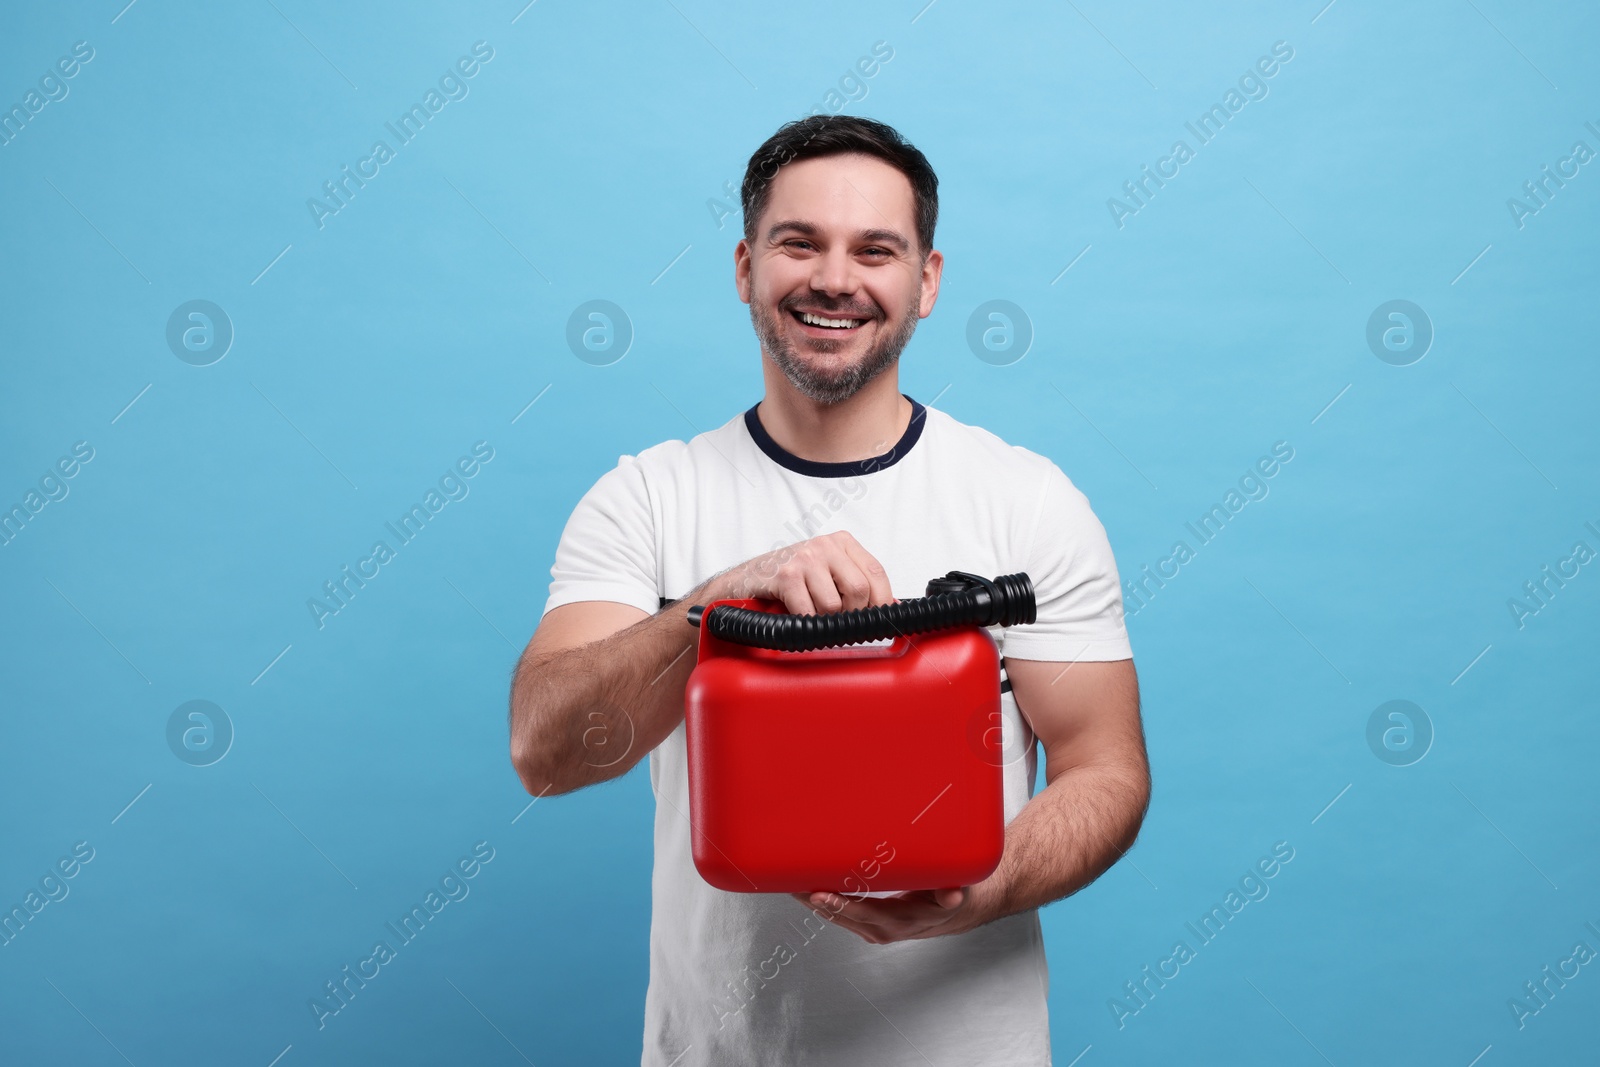 Photo of Man holding red canister on light blue background